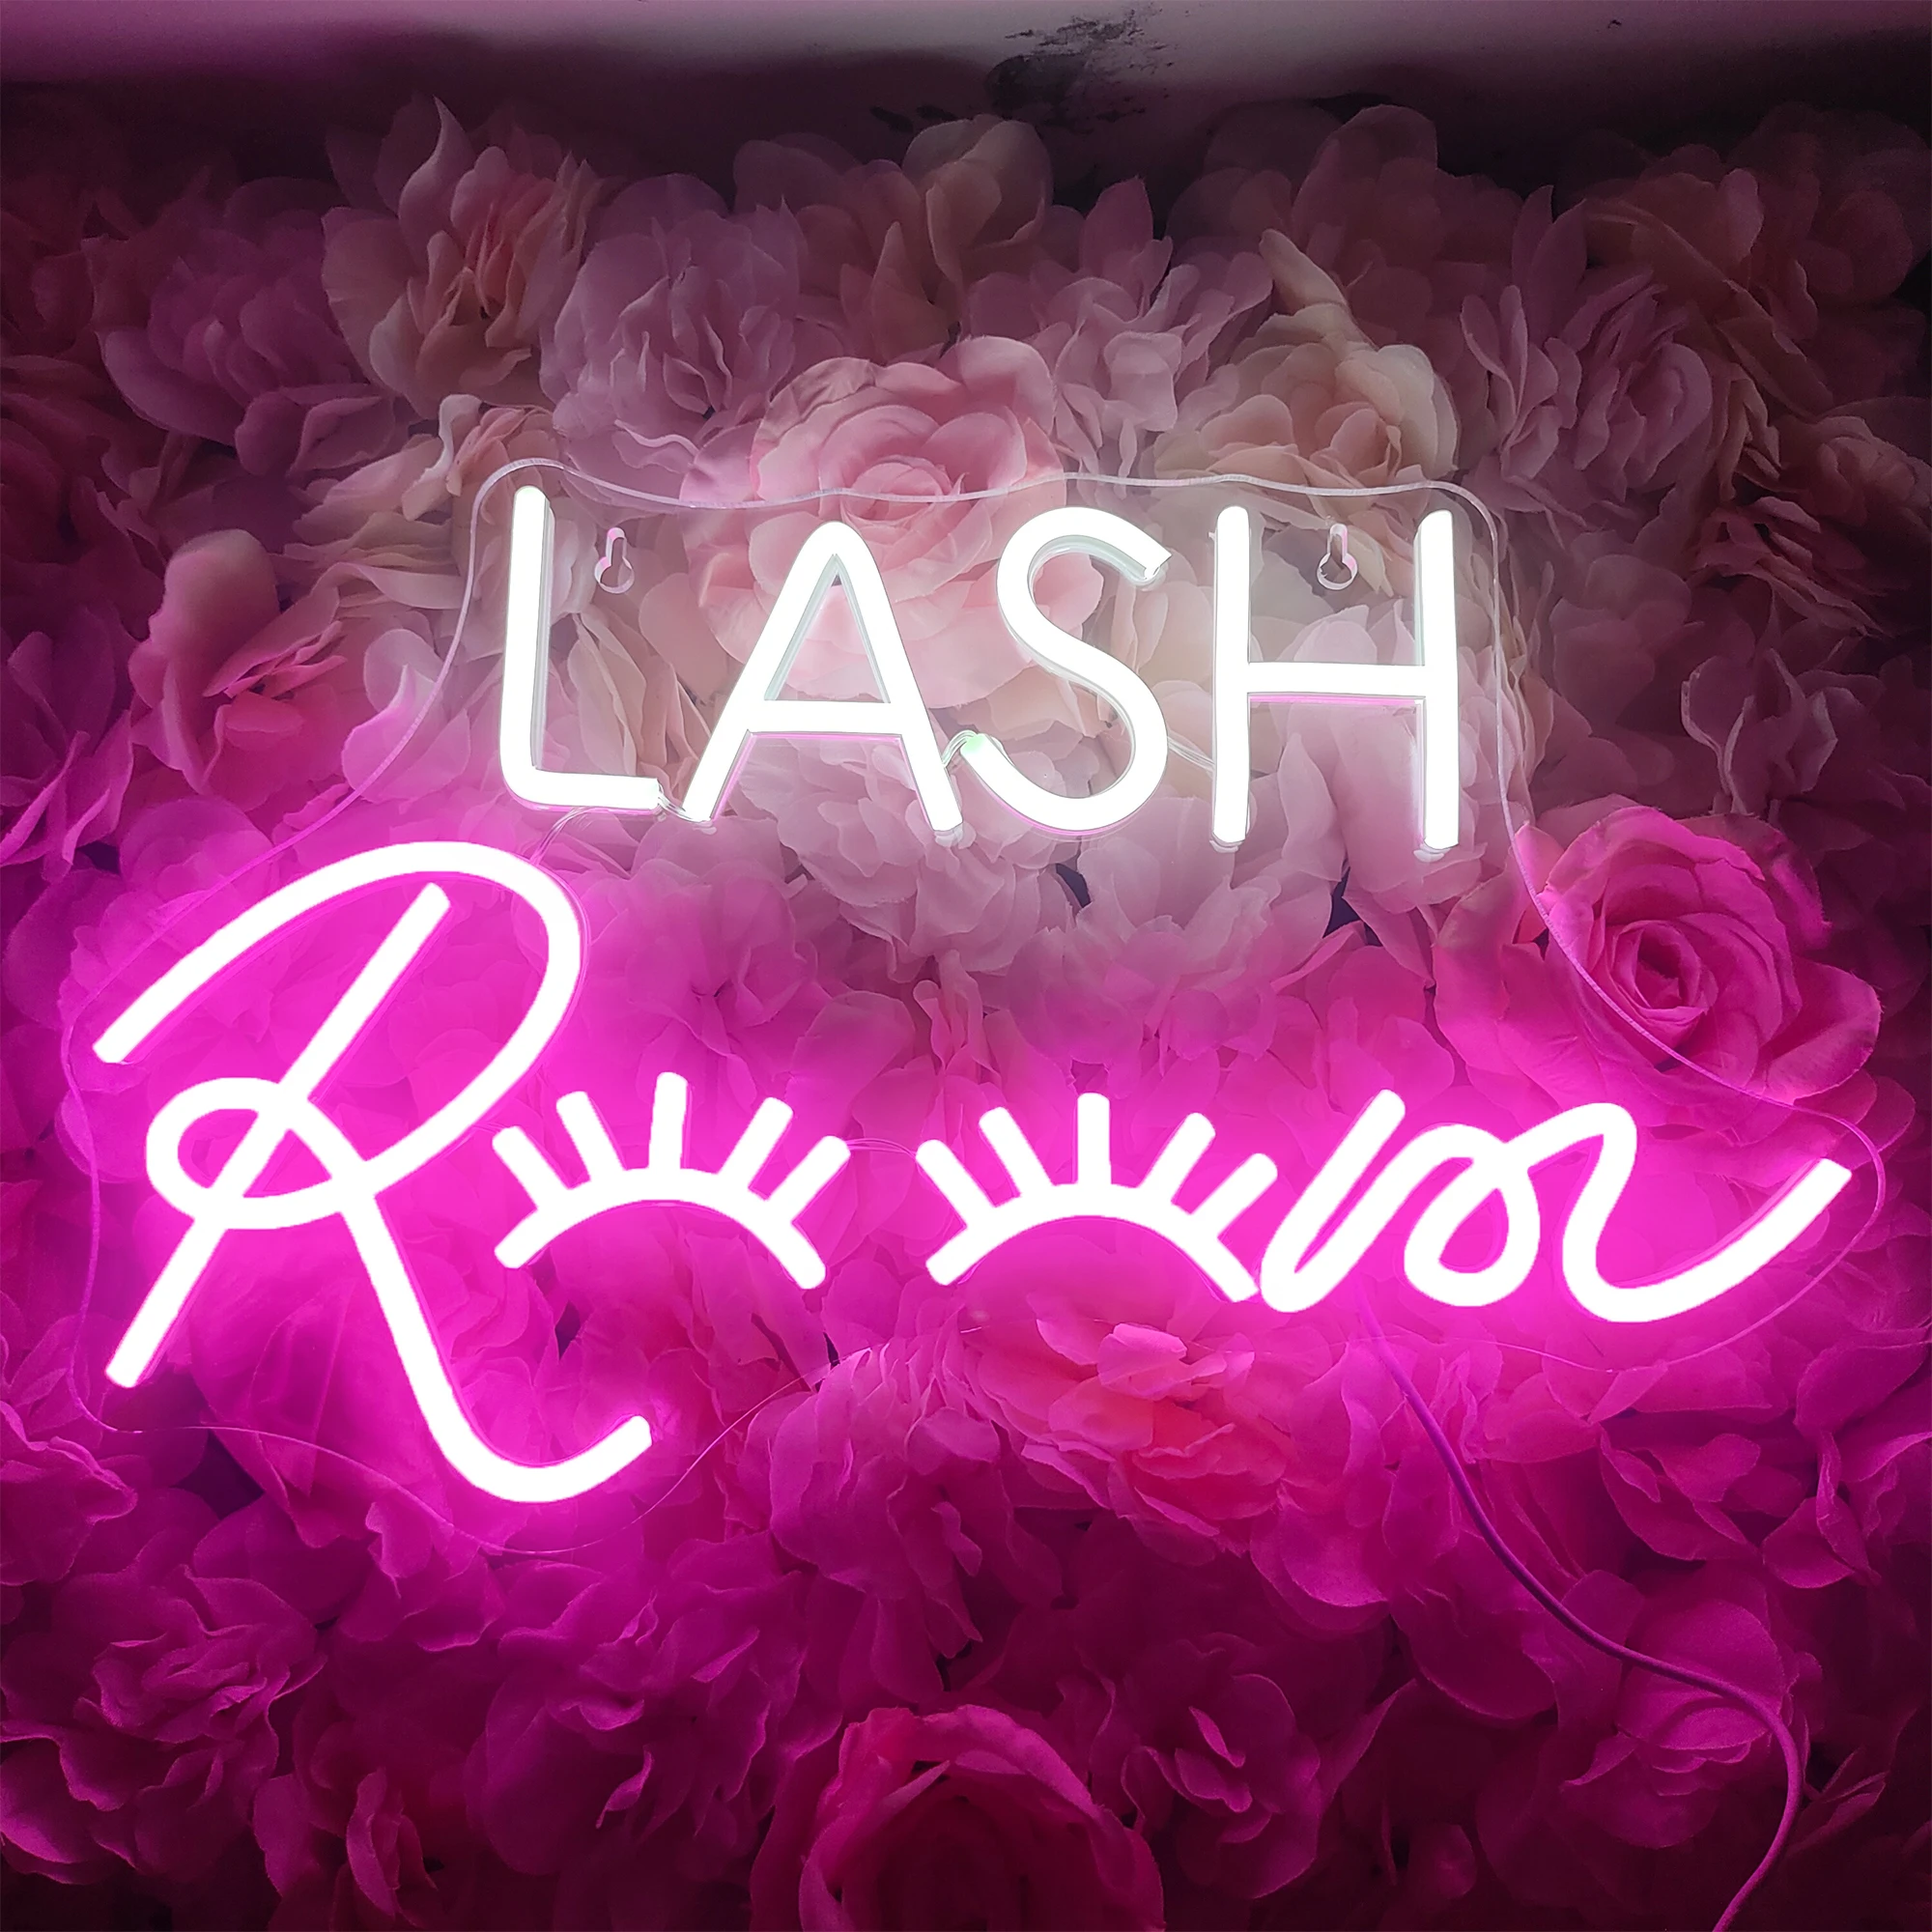 LED Neon Sign Lights LASH Room Decoration Wall Art Neon Light Beauty Salon Decor Pink Neon LED Sign Business Signboard LED Light custom neon 40x23cm beauty salon led neon sign lights hair lashes nails brows room decoration art wall hanging neon lights sign